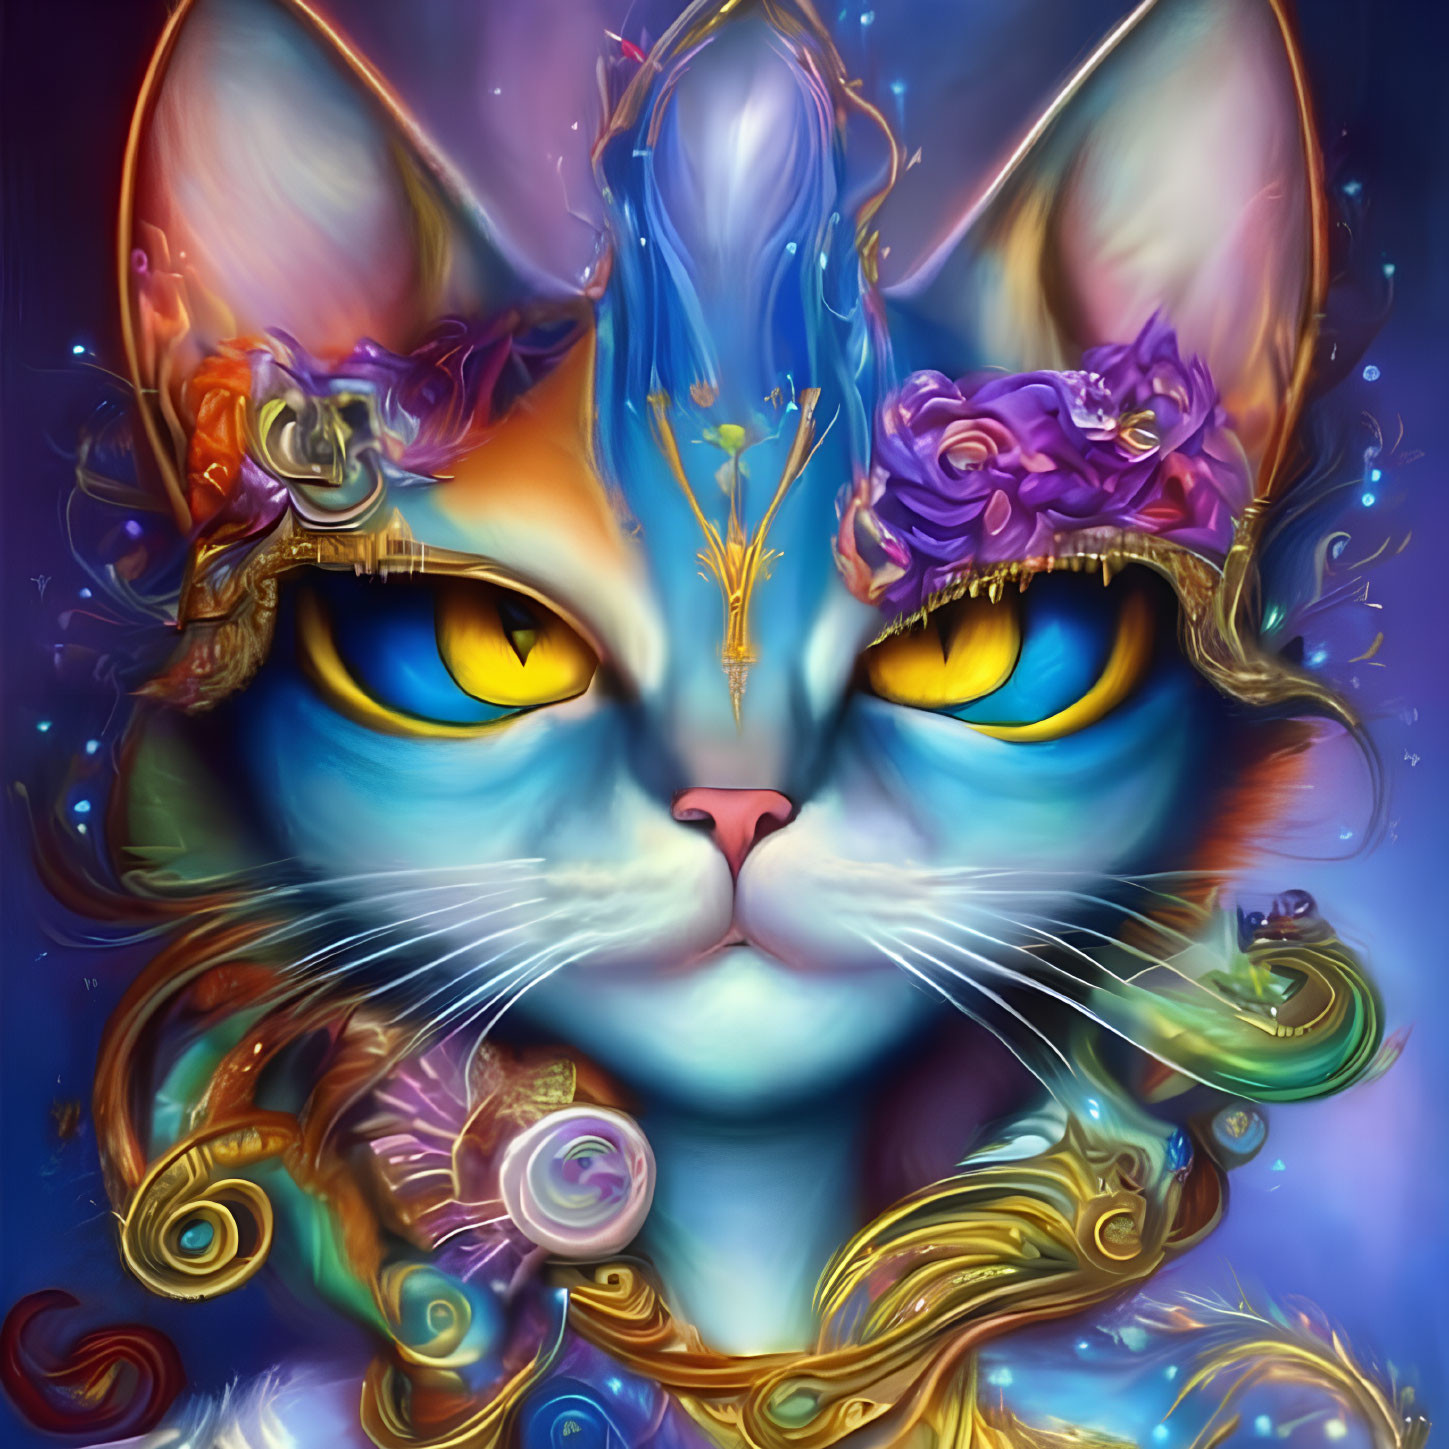 Colorful digital artwork featuring a blue fur cat with golden eyes and floral accessories